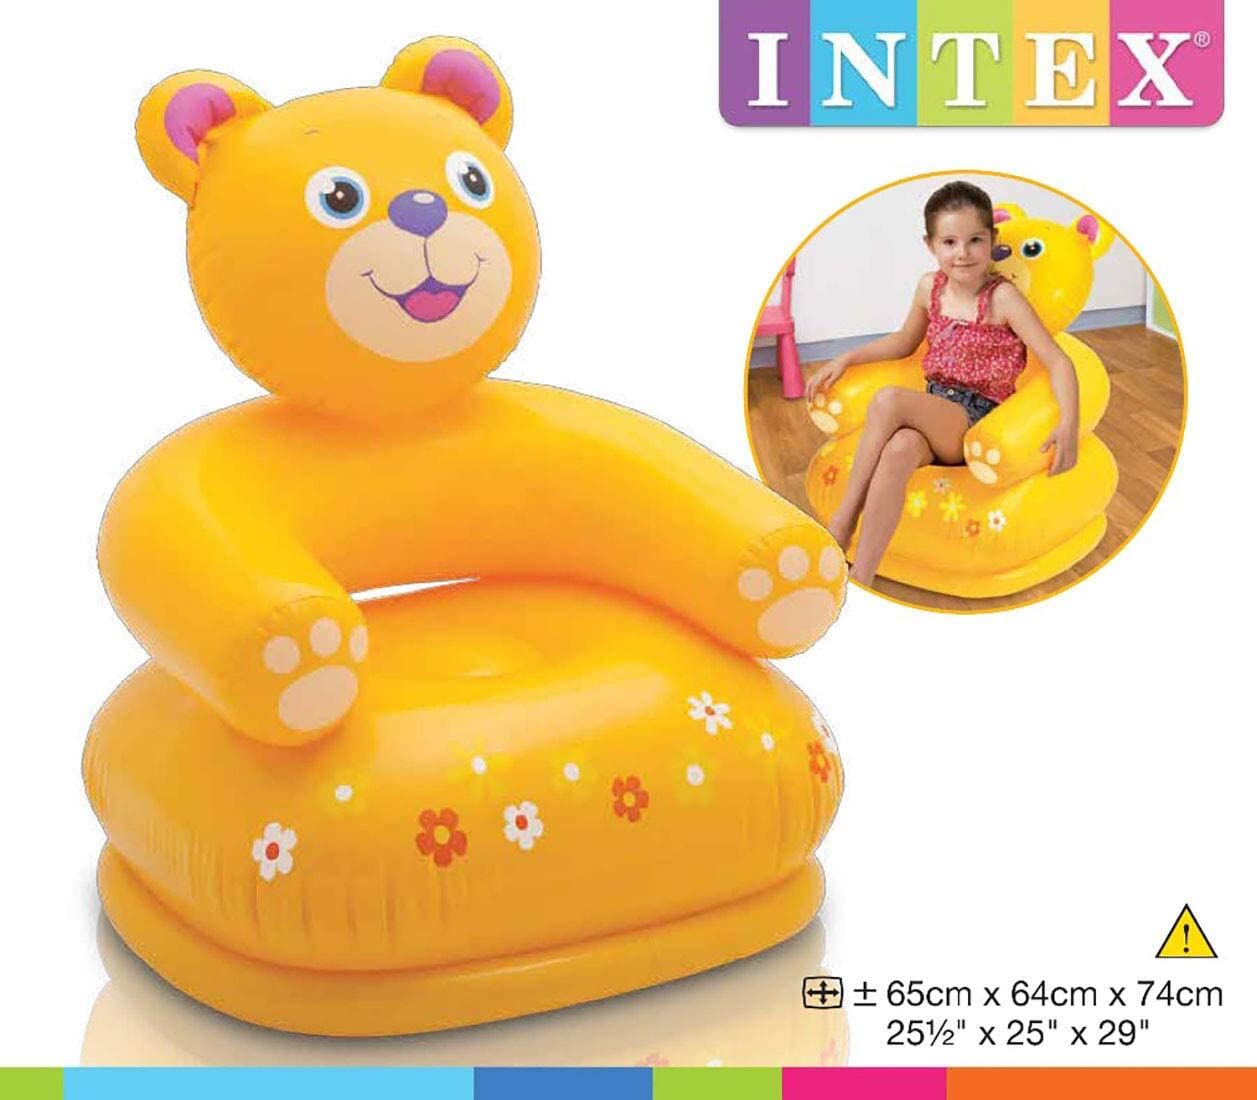 Intex Teddy Inflatable Chair For kids 2-8 Years For Both Boys And Girls